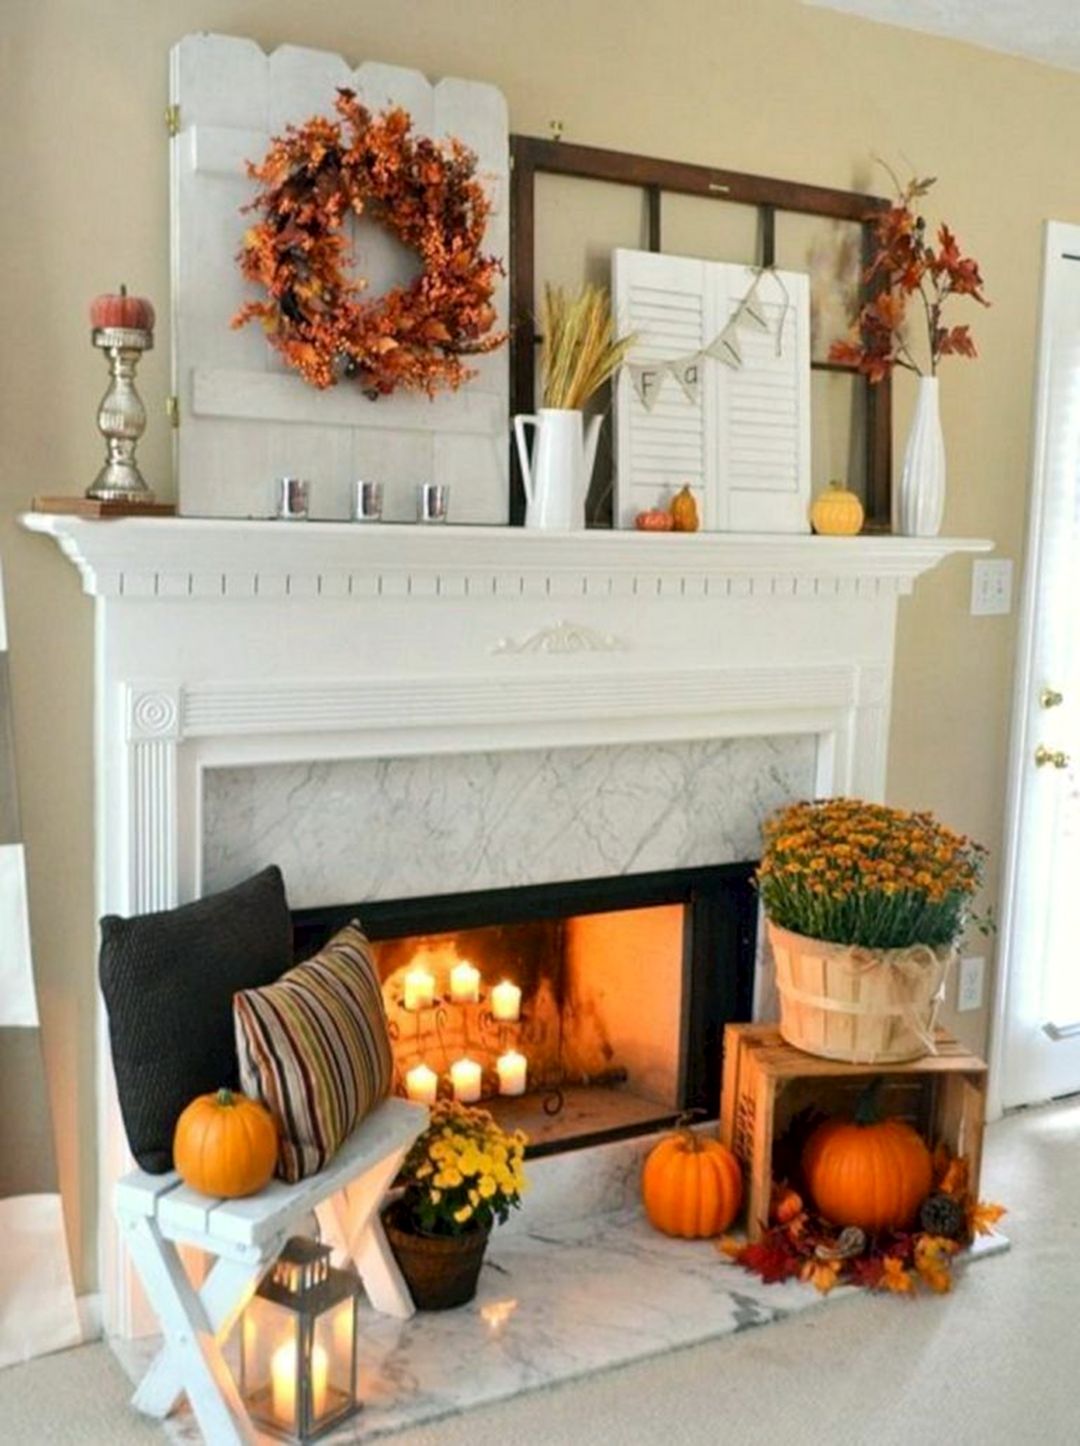 Thanksgiving mantel and fireplace decor ideas